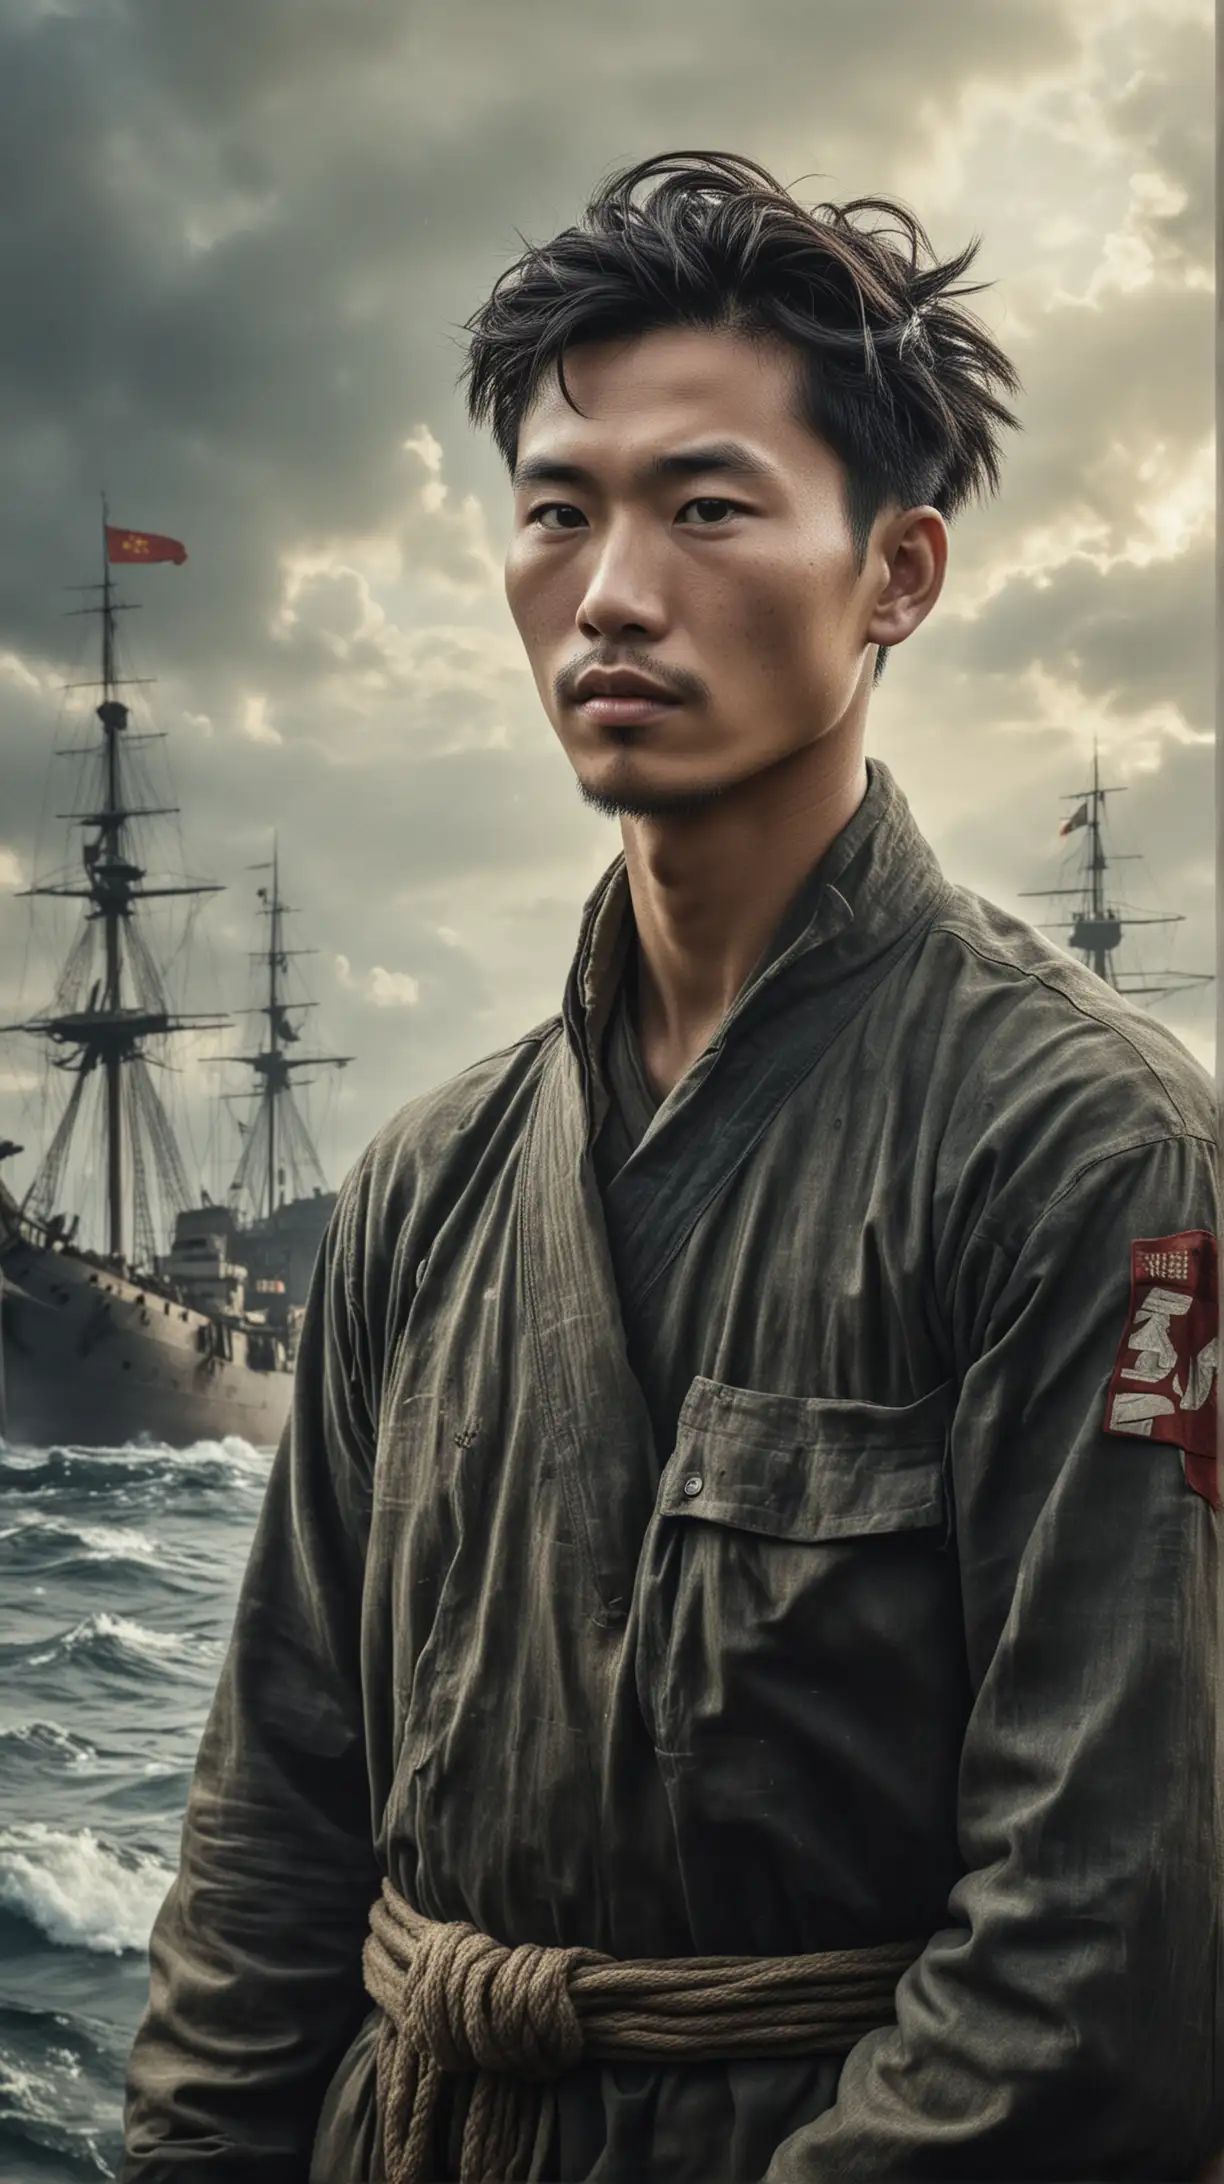 Pan Lyan Courageous Legacy of a 24YearOld Chinese Mariner in 1942